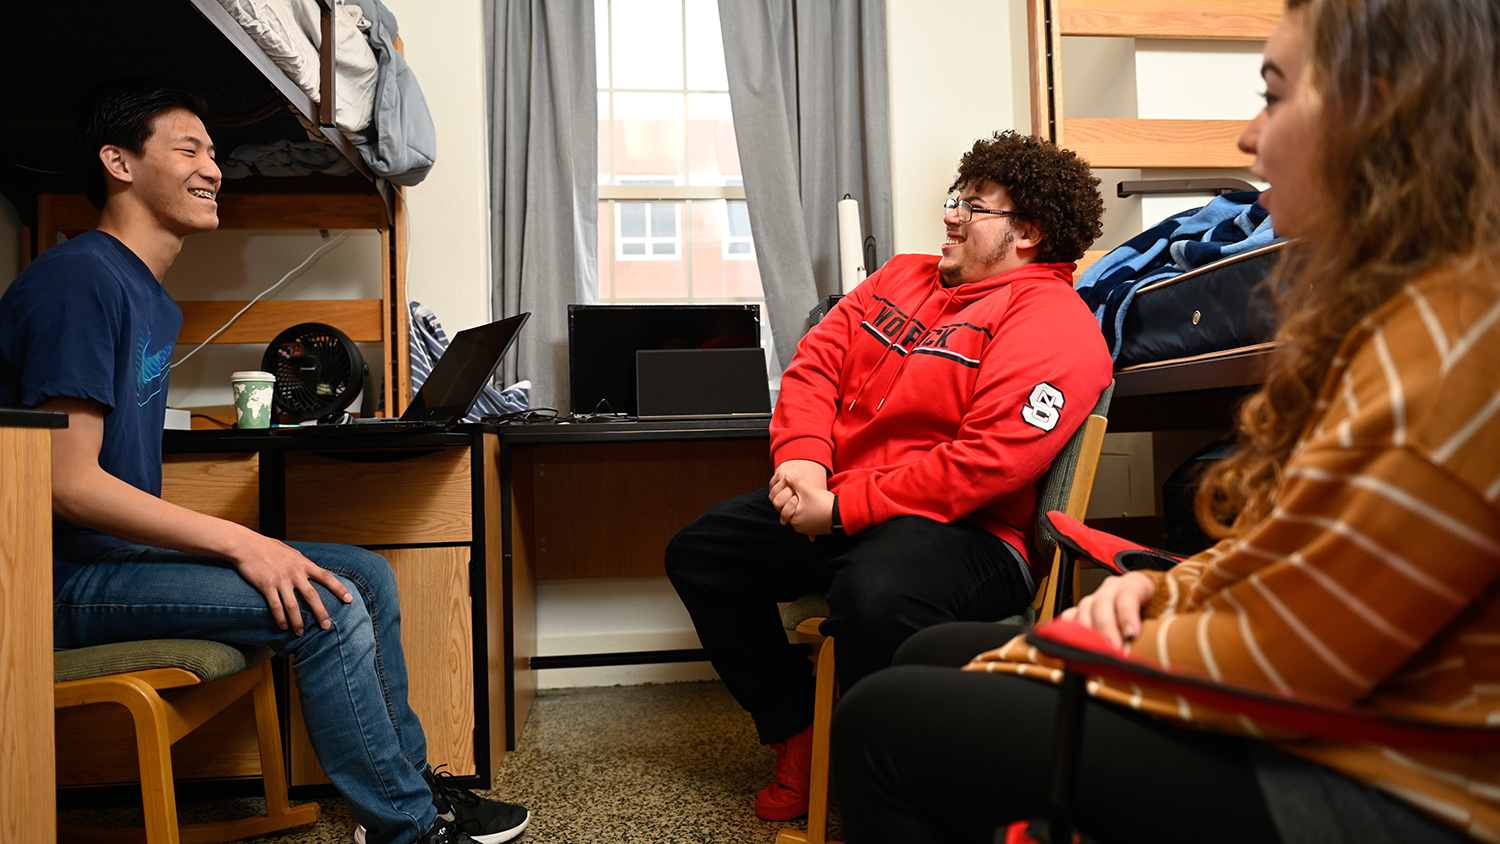 Three students talk and laugh while sitting in a dorm room.